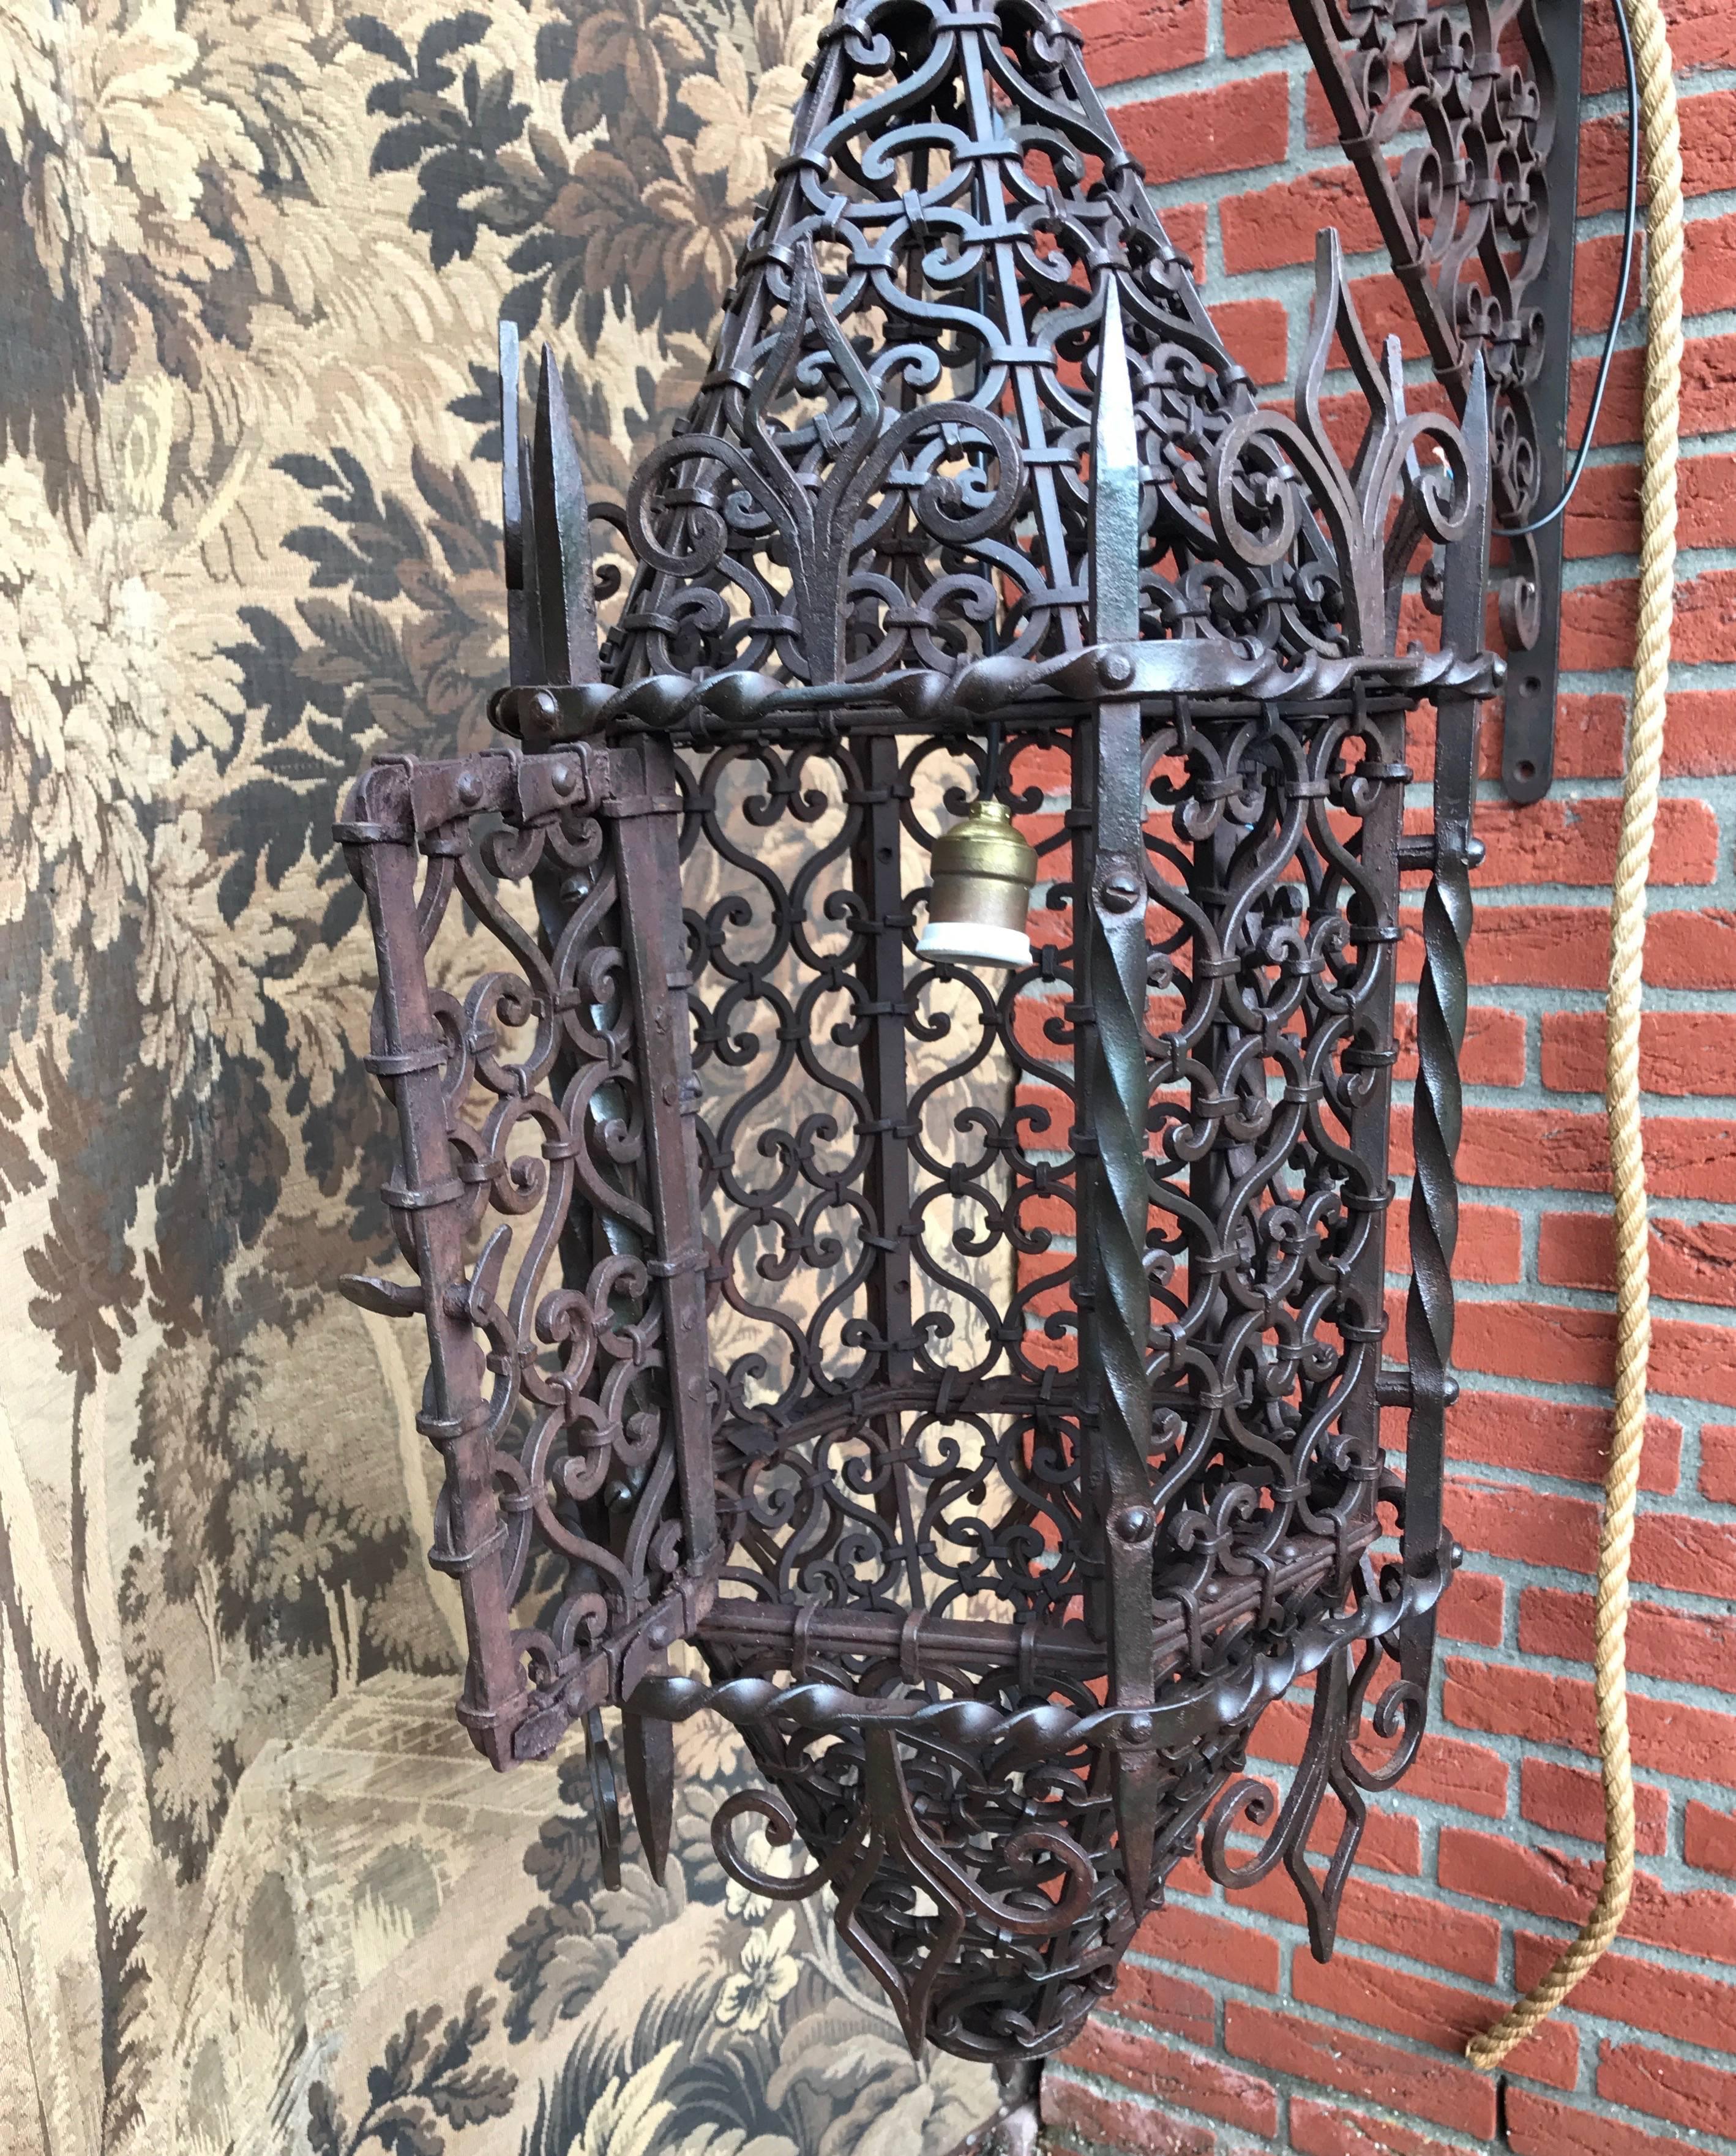 Unique, stunning and all handcrafted work of antique lighting art.

The amount of time that must have gone into designing and hand-forging this Moorish style light fixture is incredible. There are so many, individually forged and perfectly shaped